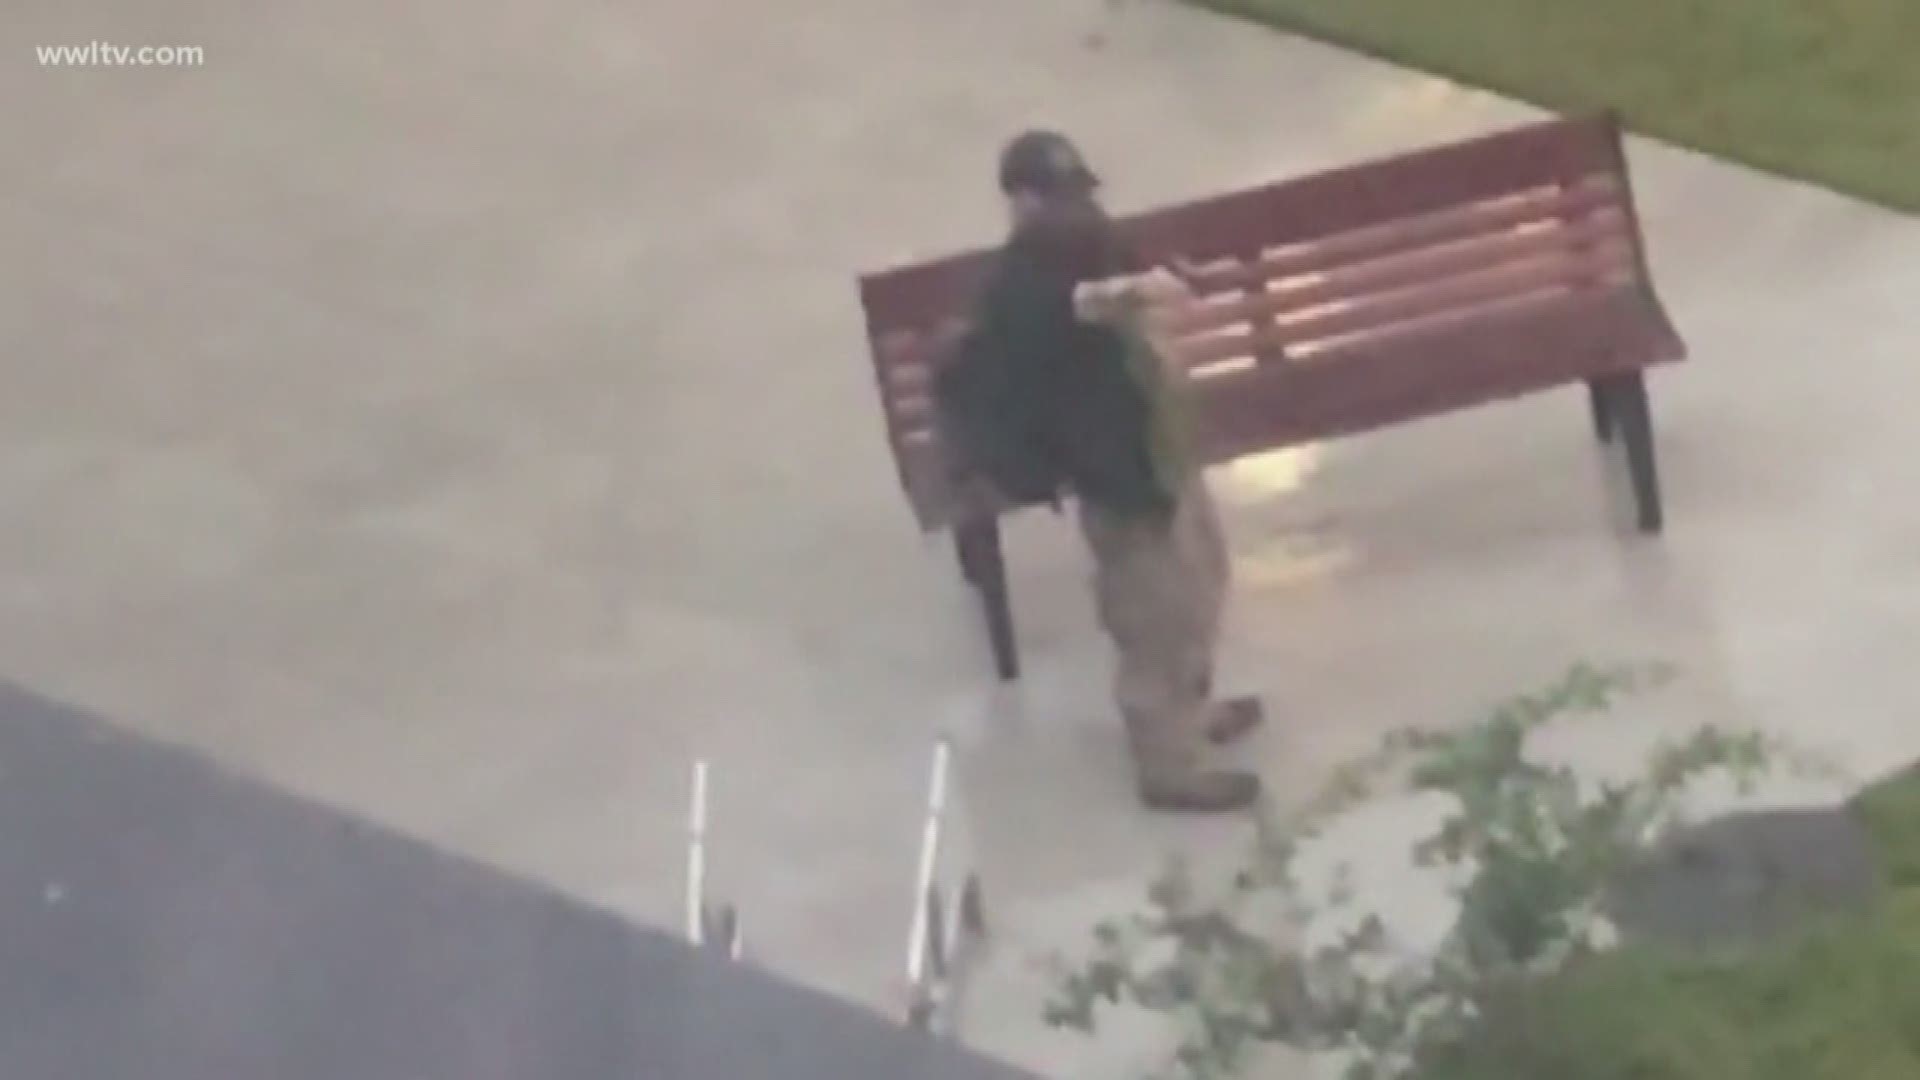 Video shows the man pull out a handgun and open fire in an apartment complex's courtyard.